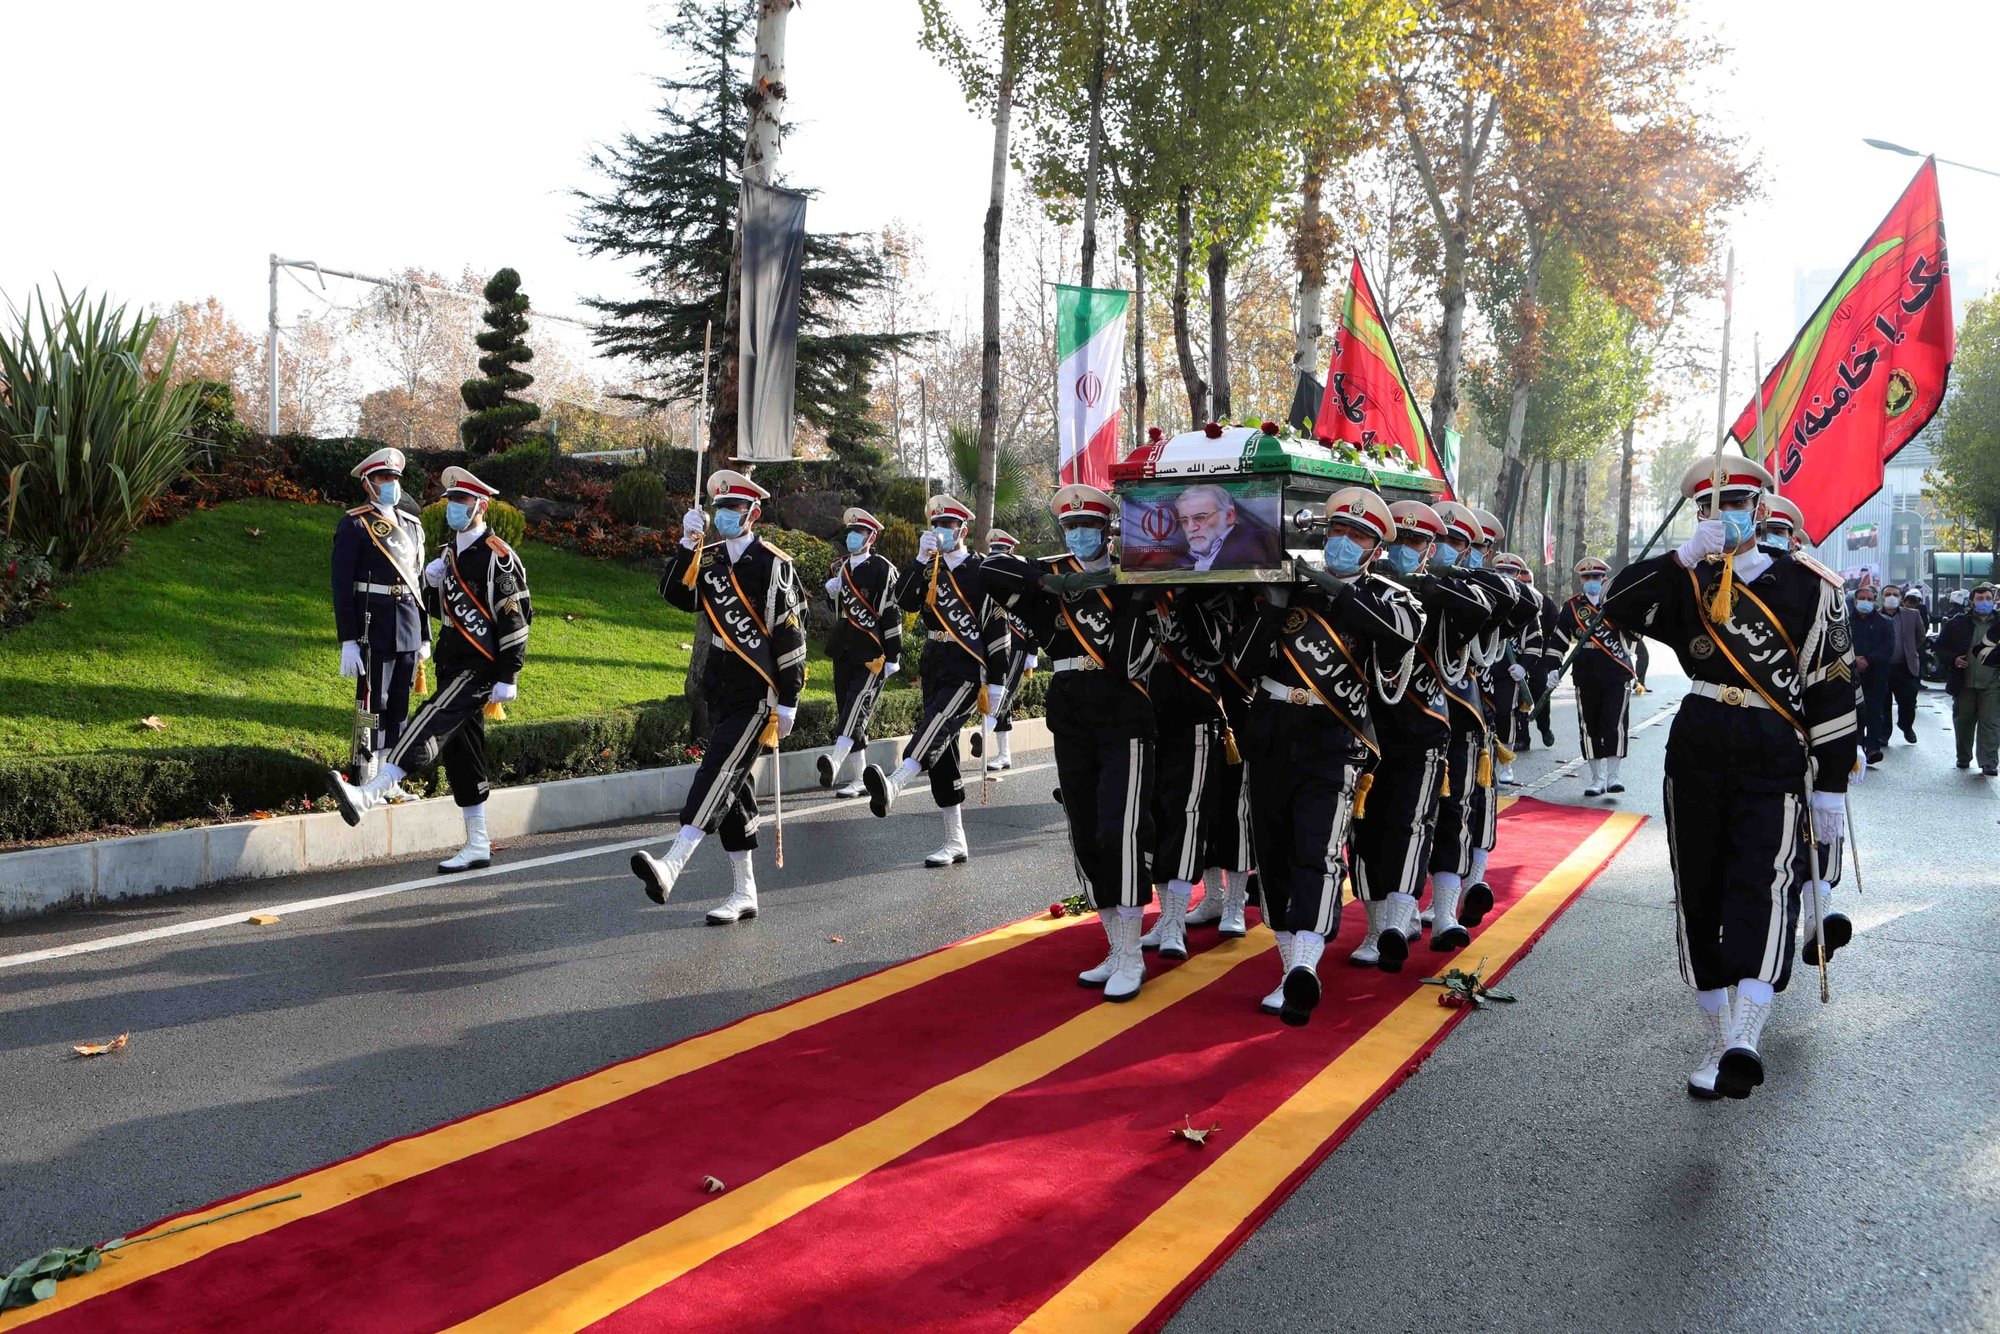 epa08852619 A handout photo made available by the Iranian defence ministry office shows soldiers carrying the coffin of slain Iranian nuclear scientist Mohsen Fakhrizadeh during funeral procession inside the Iranian defense ministry in Tehran, Iran, 30 November 2020. Media reported that Iran blamed Israel for the assassination of Mohsen Fakhrizadeh, a senior Iranian nuclear scientist.  EPA/DEFENCE MINISTRY OFFICE HANDOUT  HANDOUT EDITORIAL USE ONLY/NO SALES